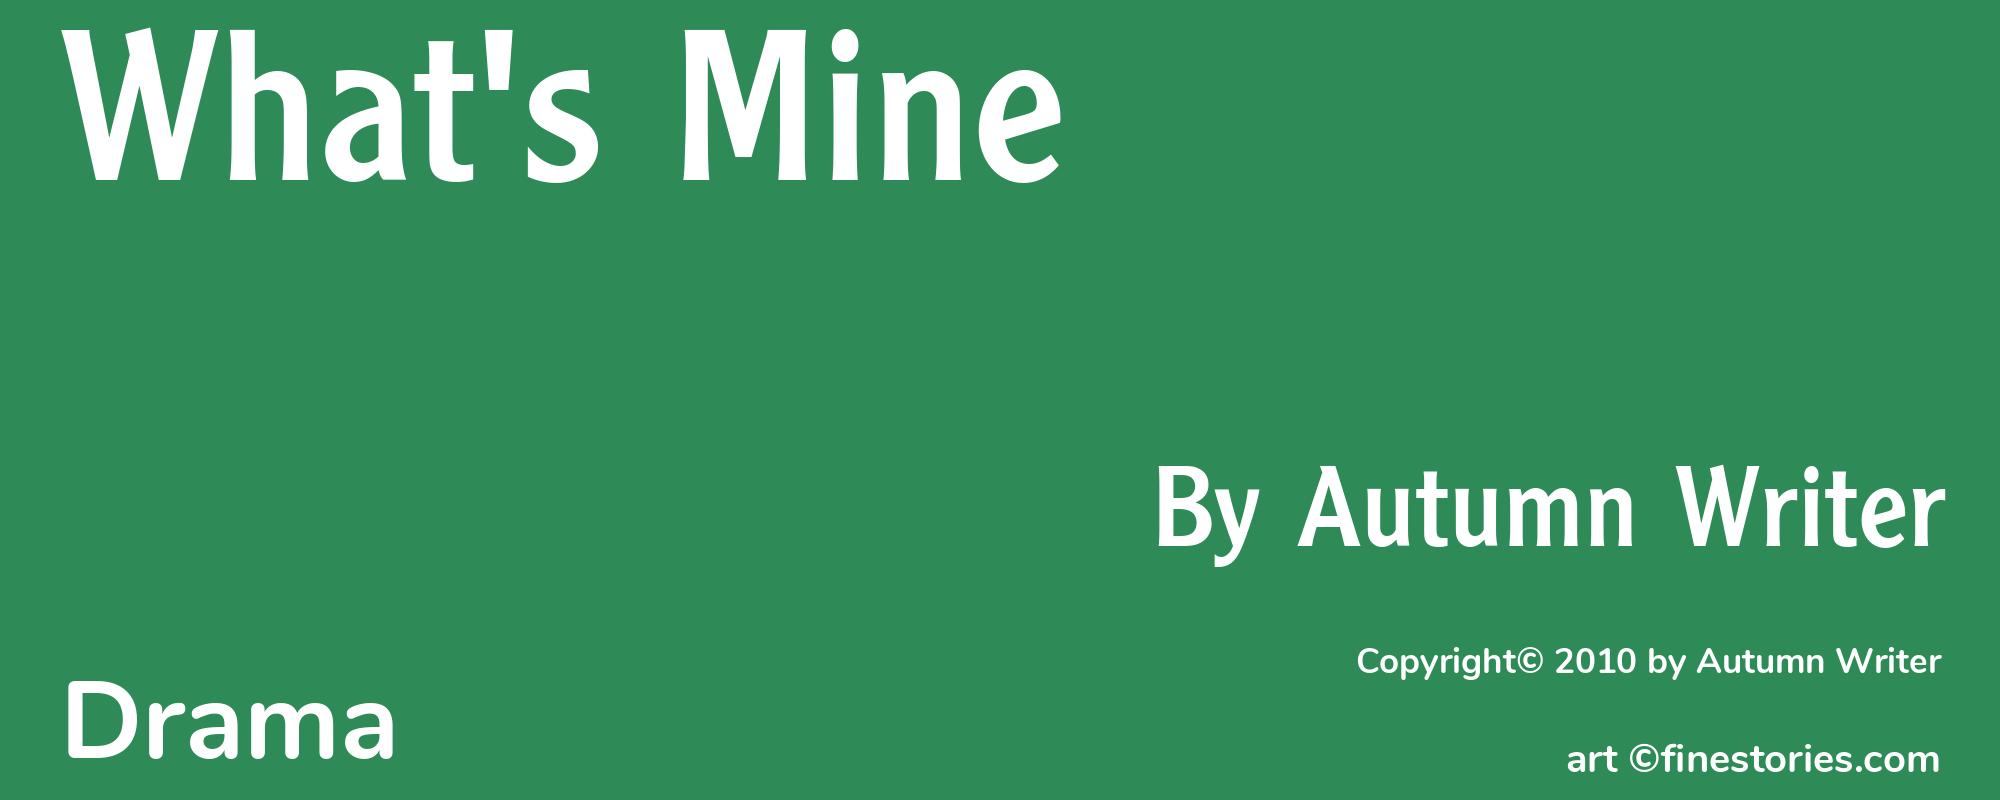 What's Mine - Cover